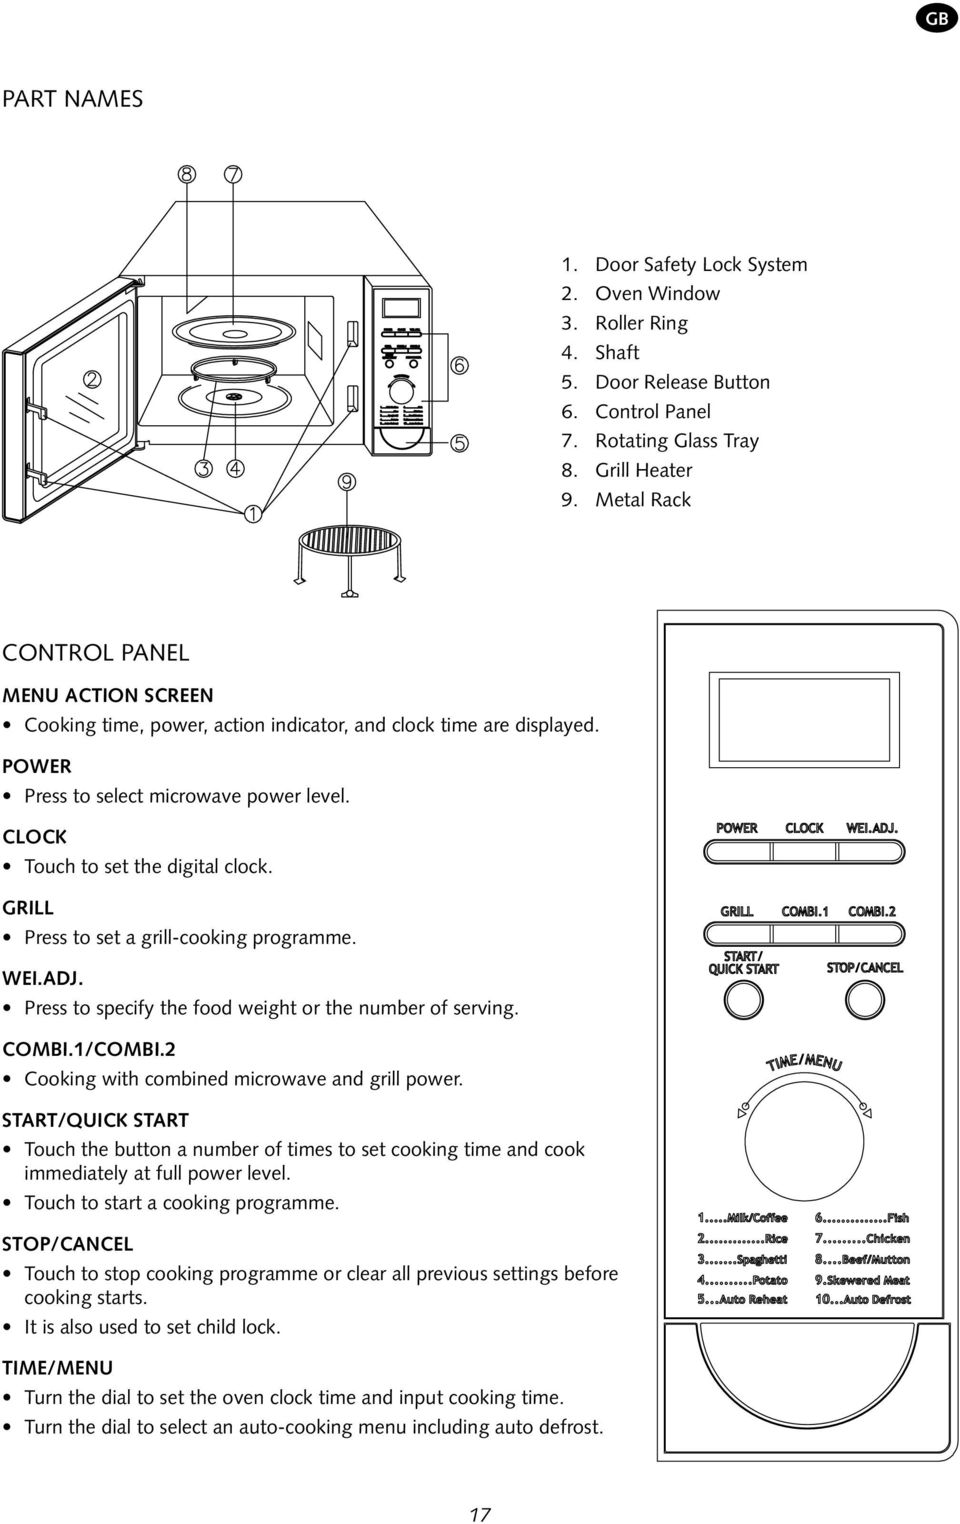 GRILL Press to set a grill-cooking programme. WEI.ADJ. Press to specify the food weight or the number of serving. COMBI.1/COMBI.2 Cooking with combined microwave and grill power.